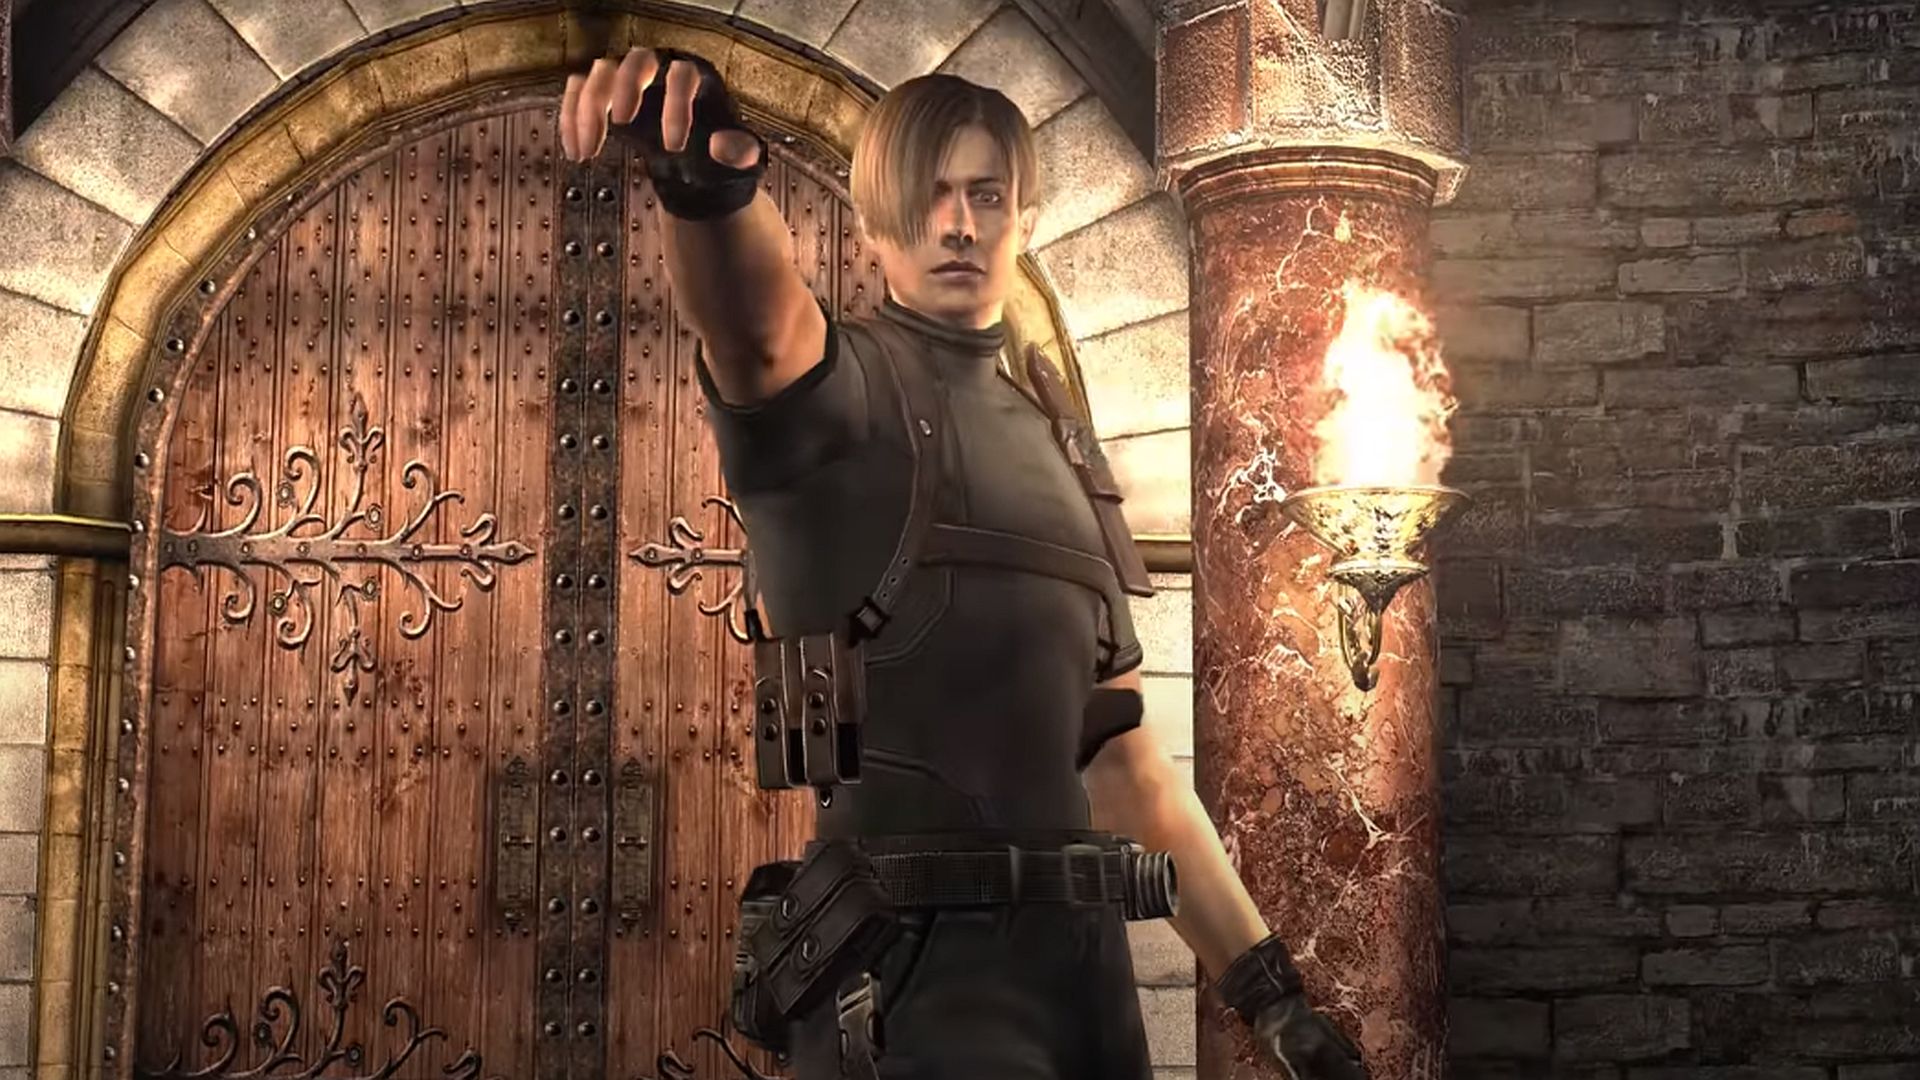 Resident Evil 4 Separate Ways HD fan mod now has three complete chapters